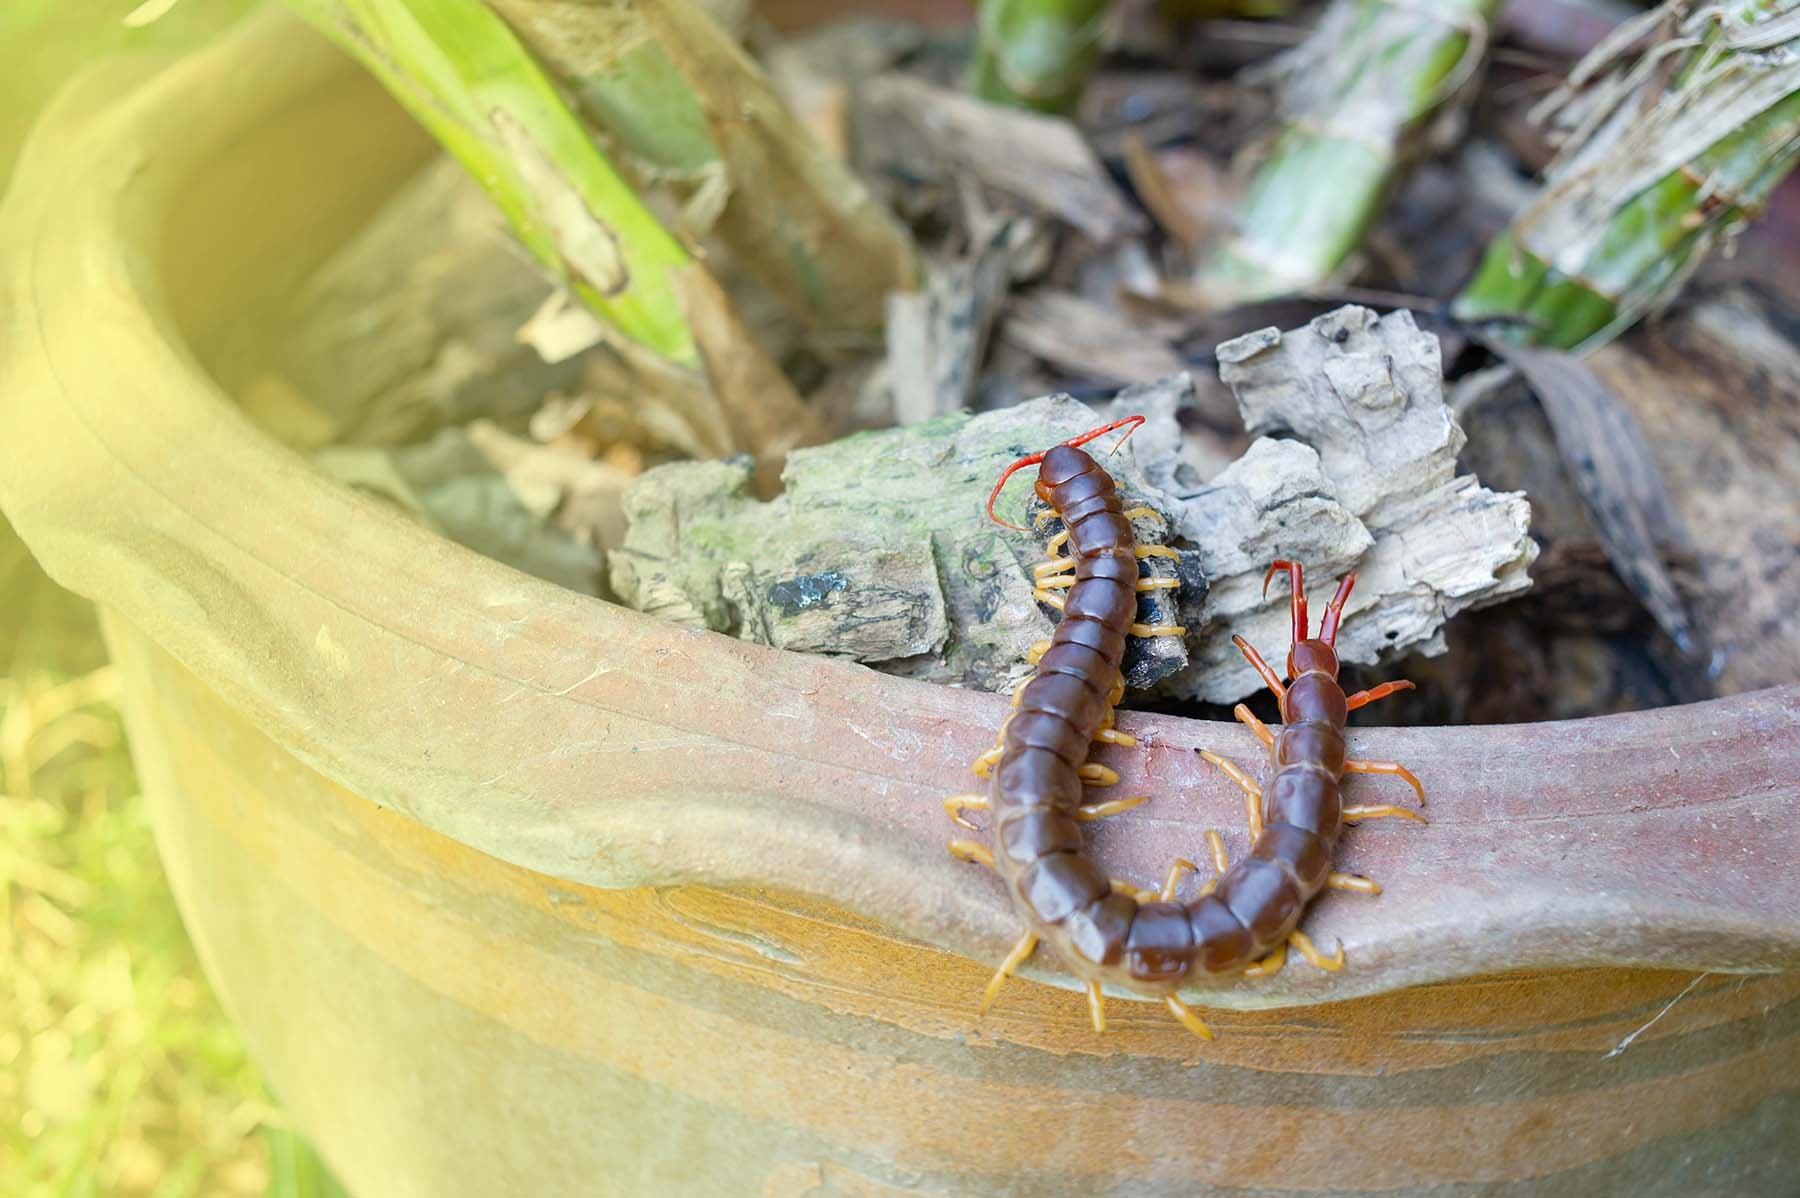 giant centipedes and millipedes